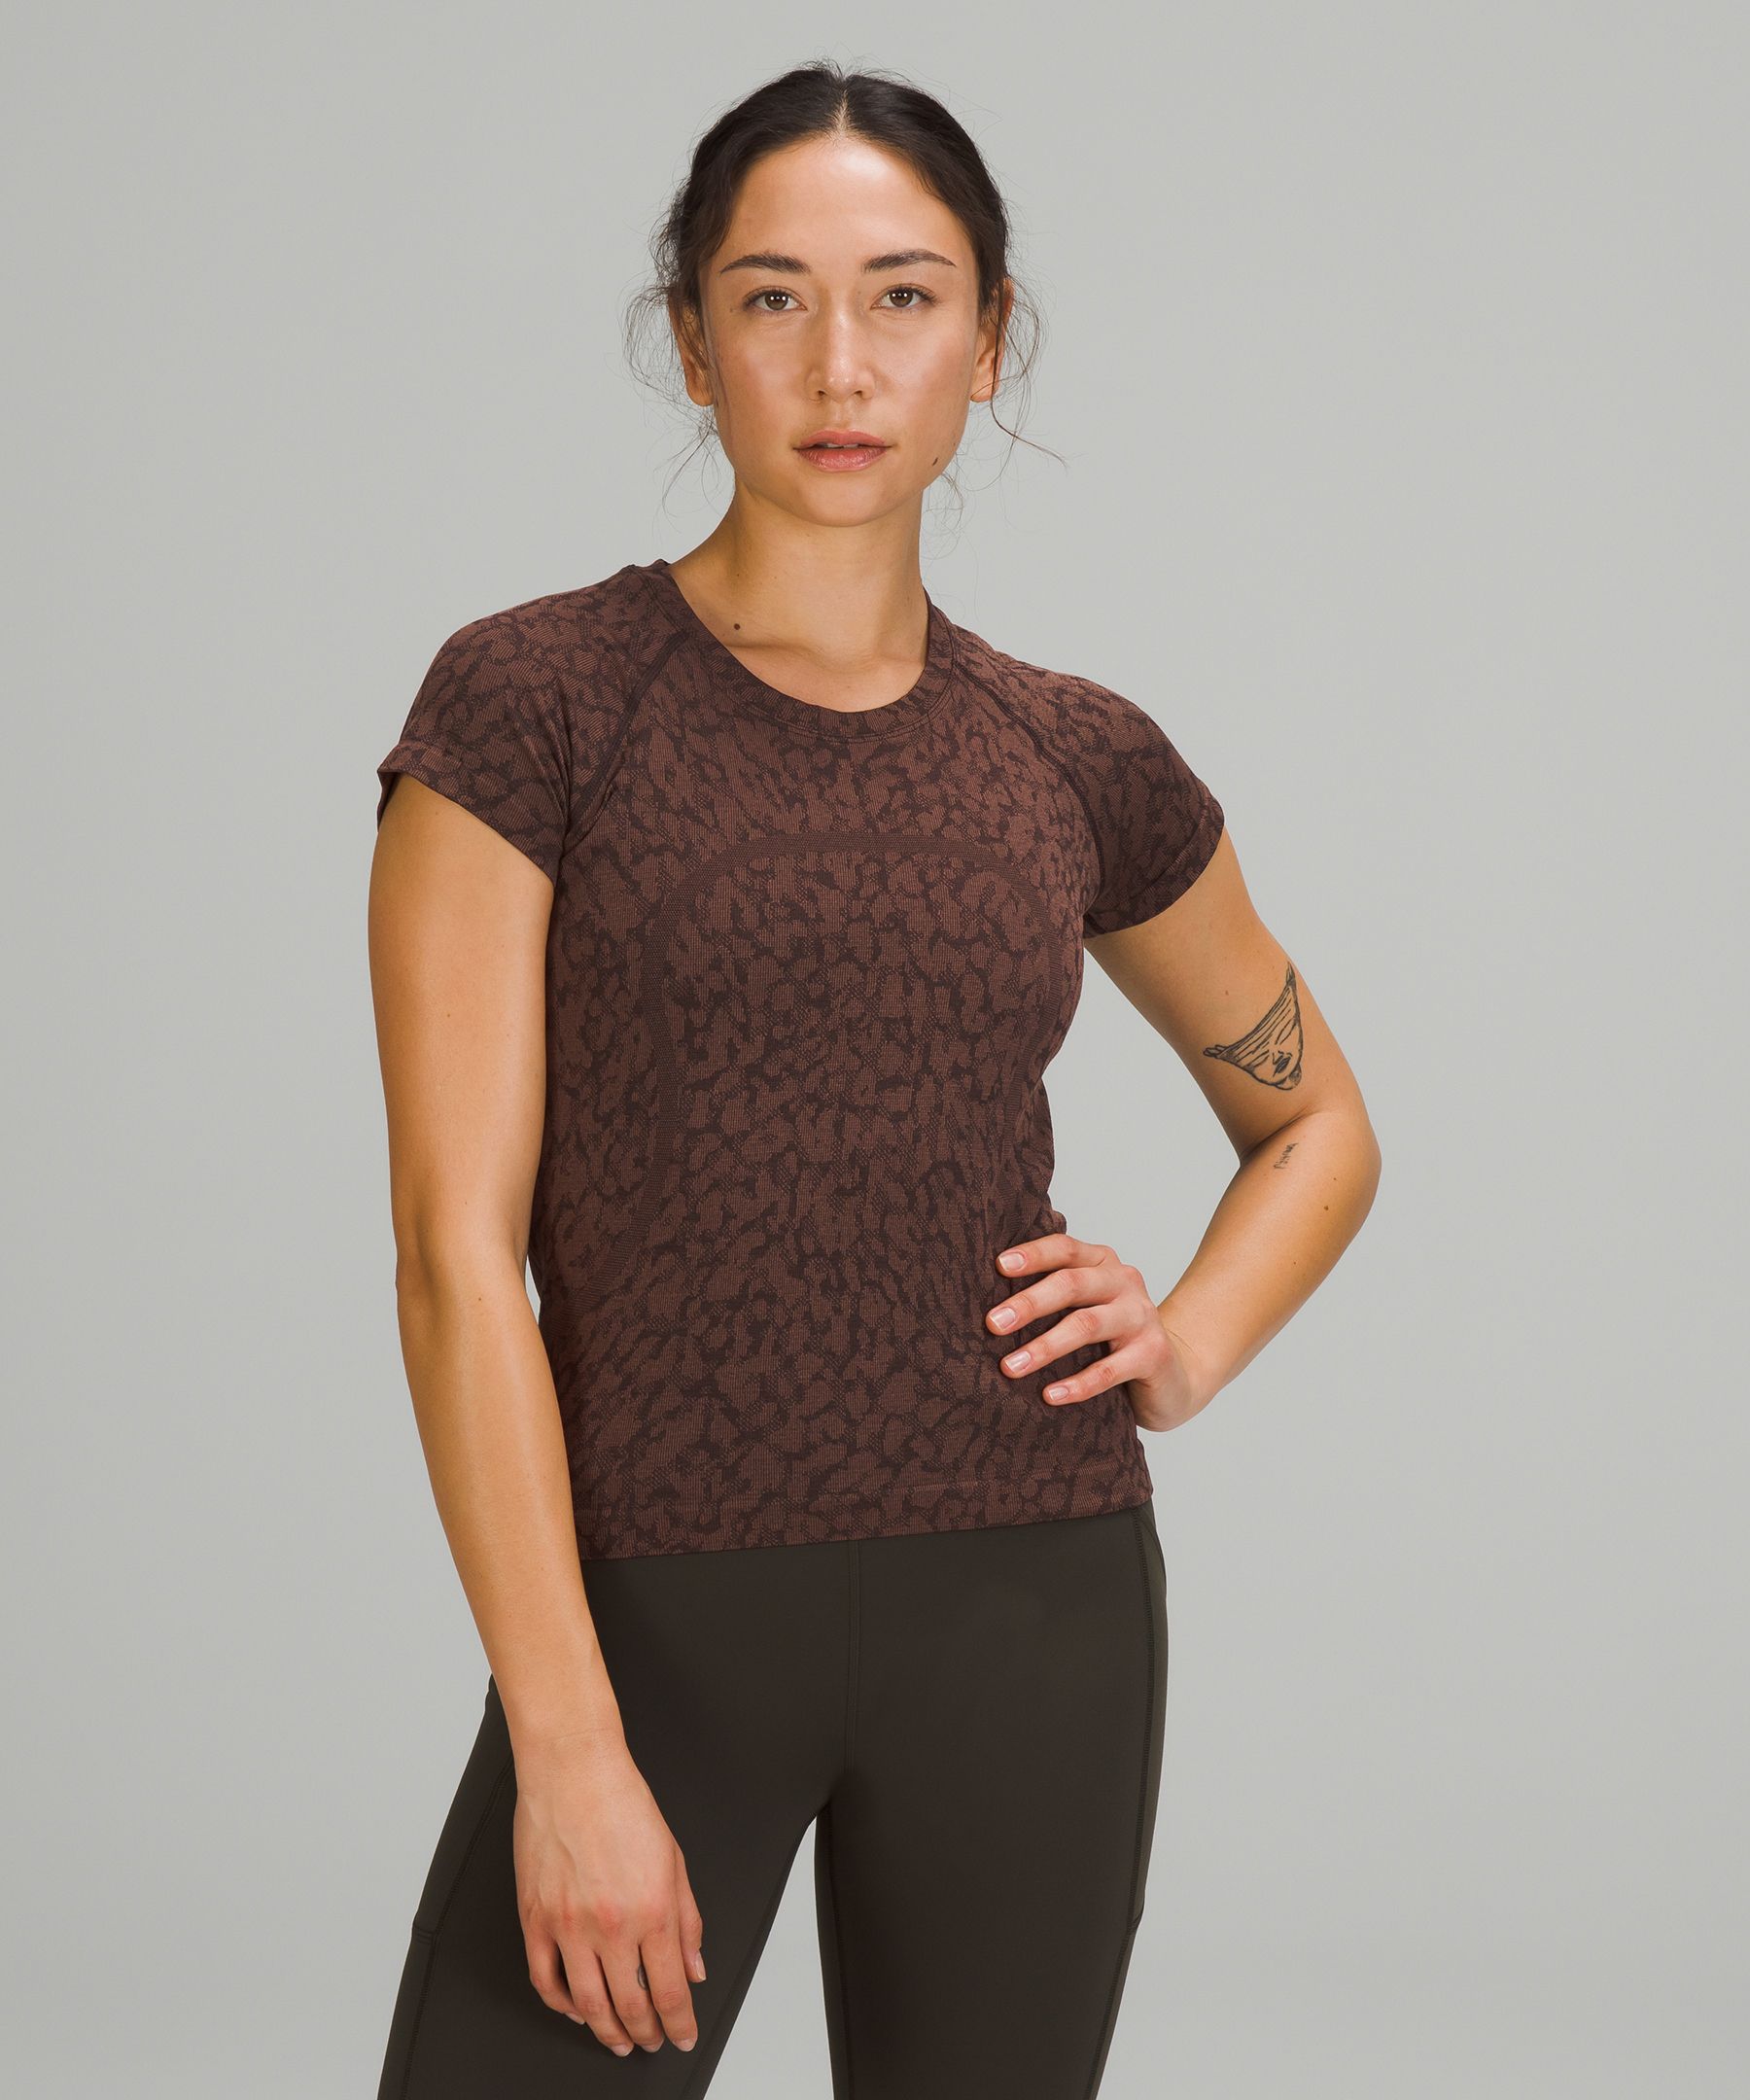 Lululemon Swiftly Tech Short Sleeve Shirt 2.0 Race Length In Particolour French Press/smoky Topaz